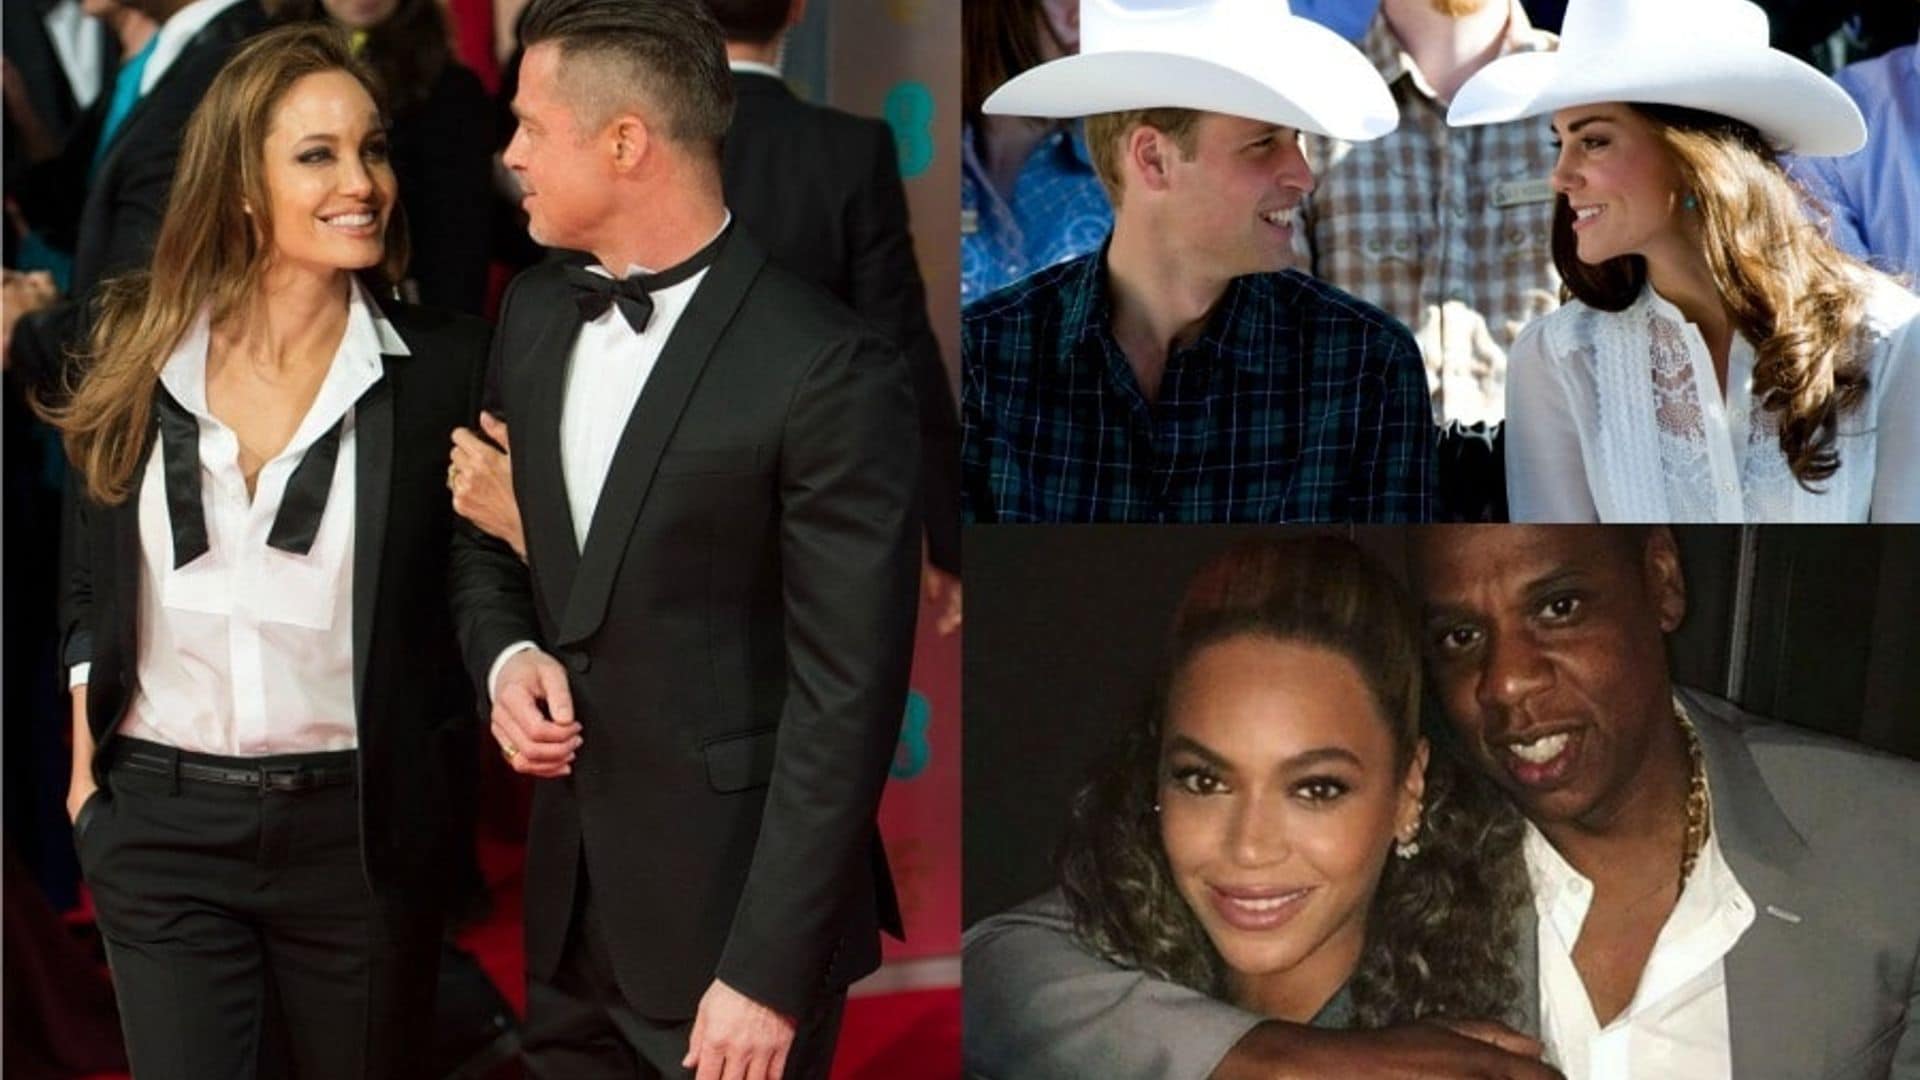 Twinning couples: Prince William and Kate Middleton, Brad Pitt and Angelina Jolie and more